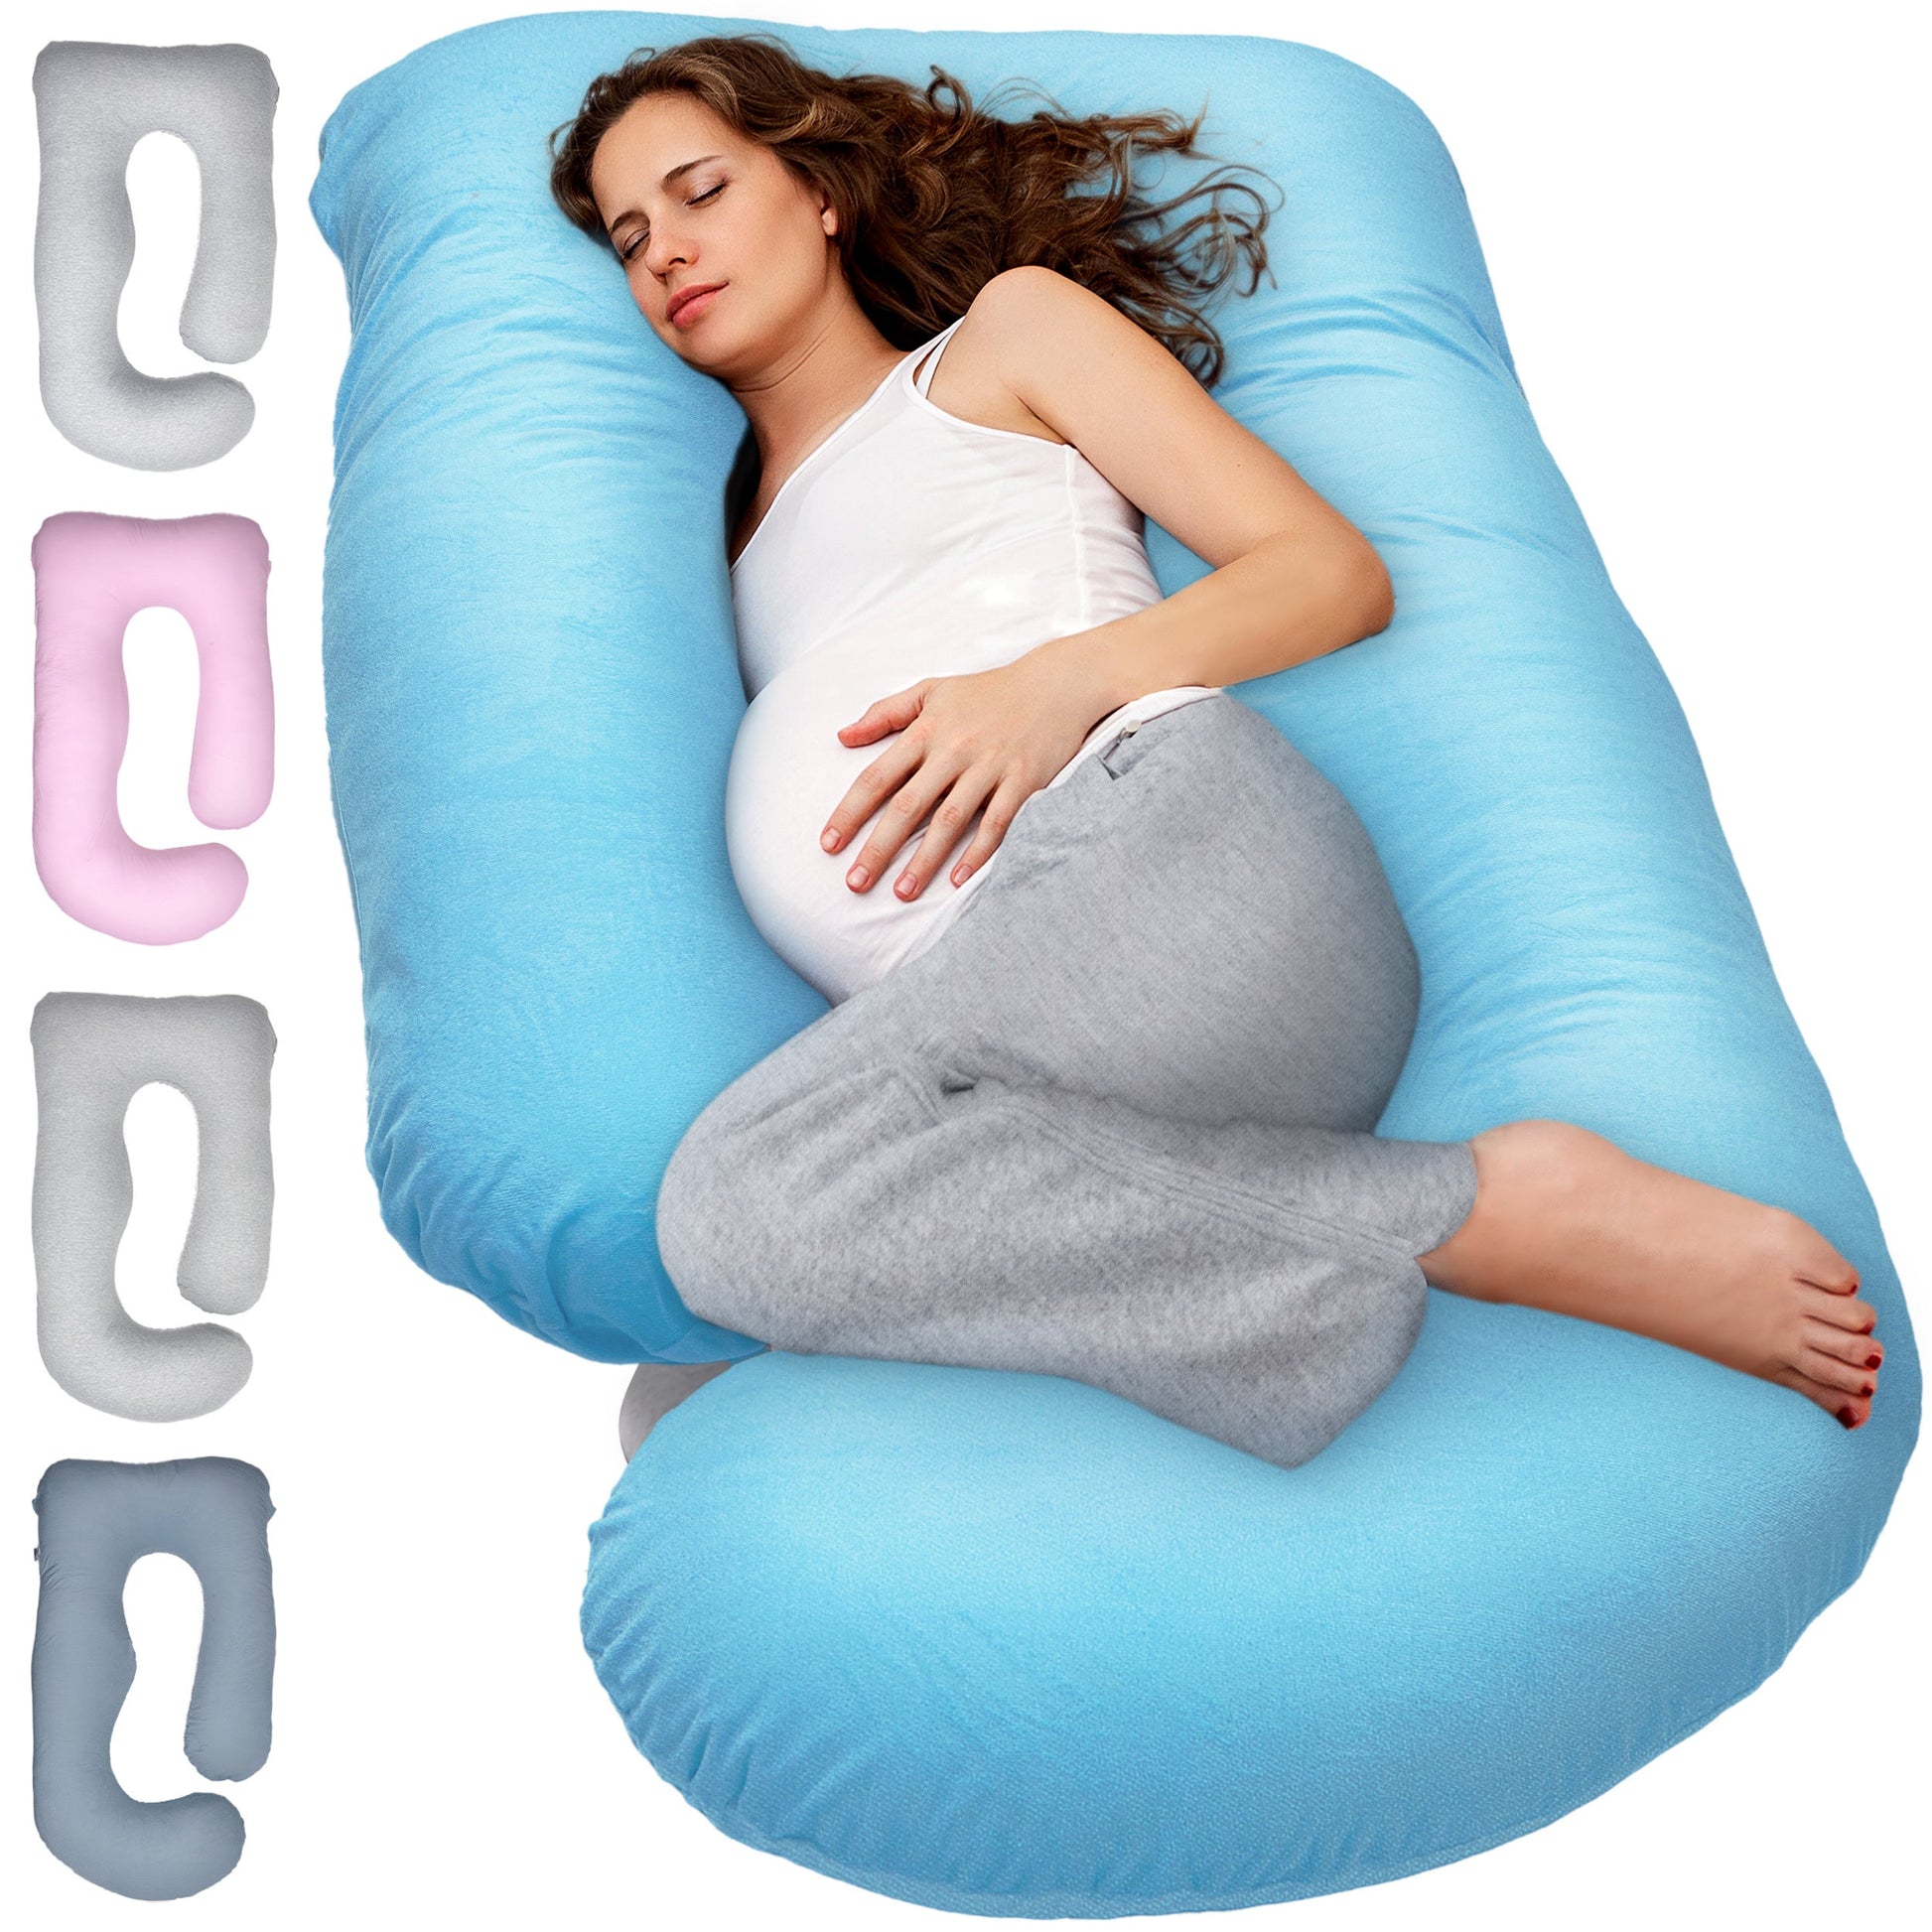 How to choose a pregnancy pillow - Today's Parent